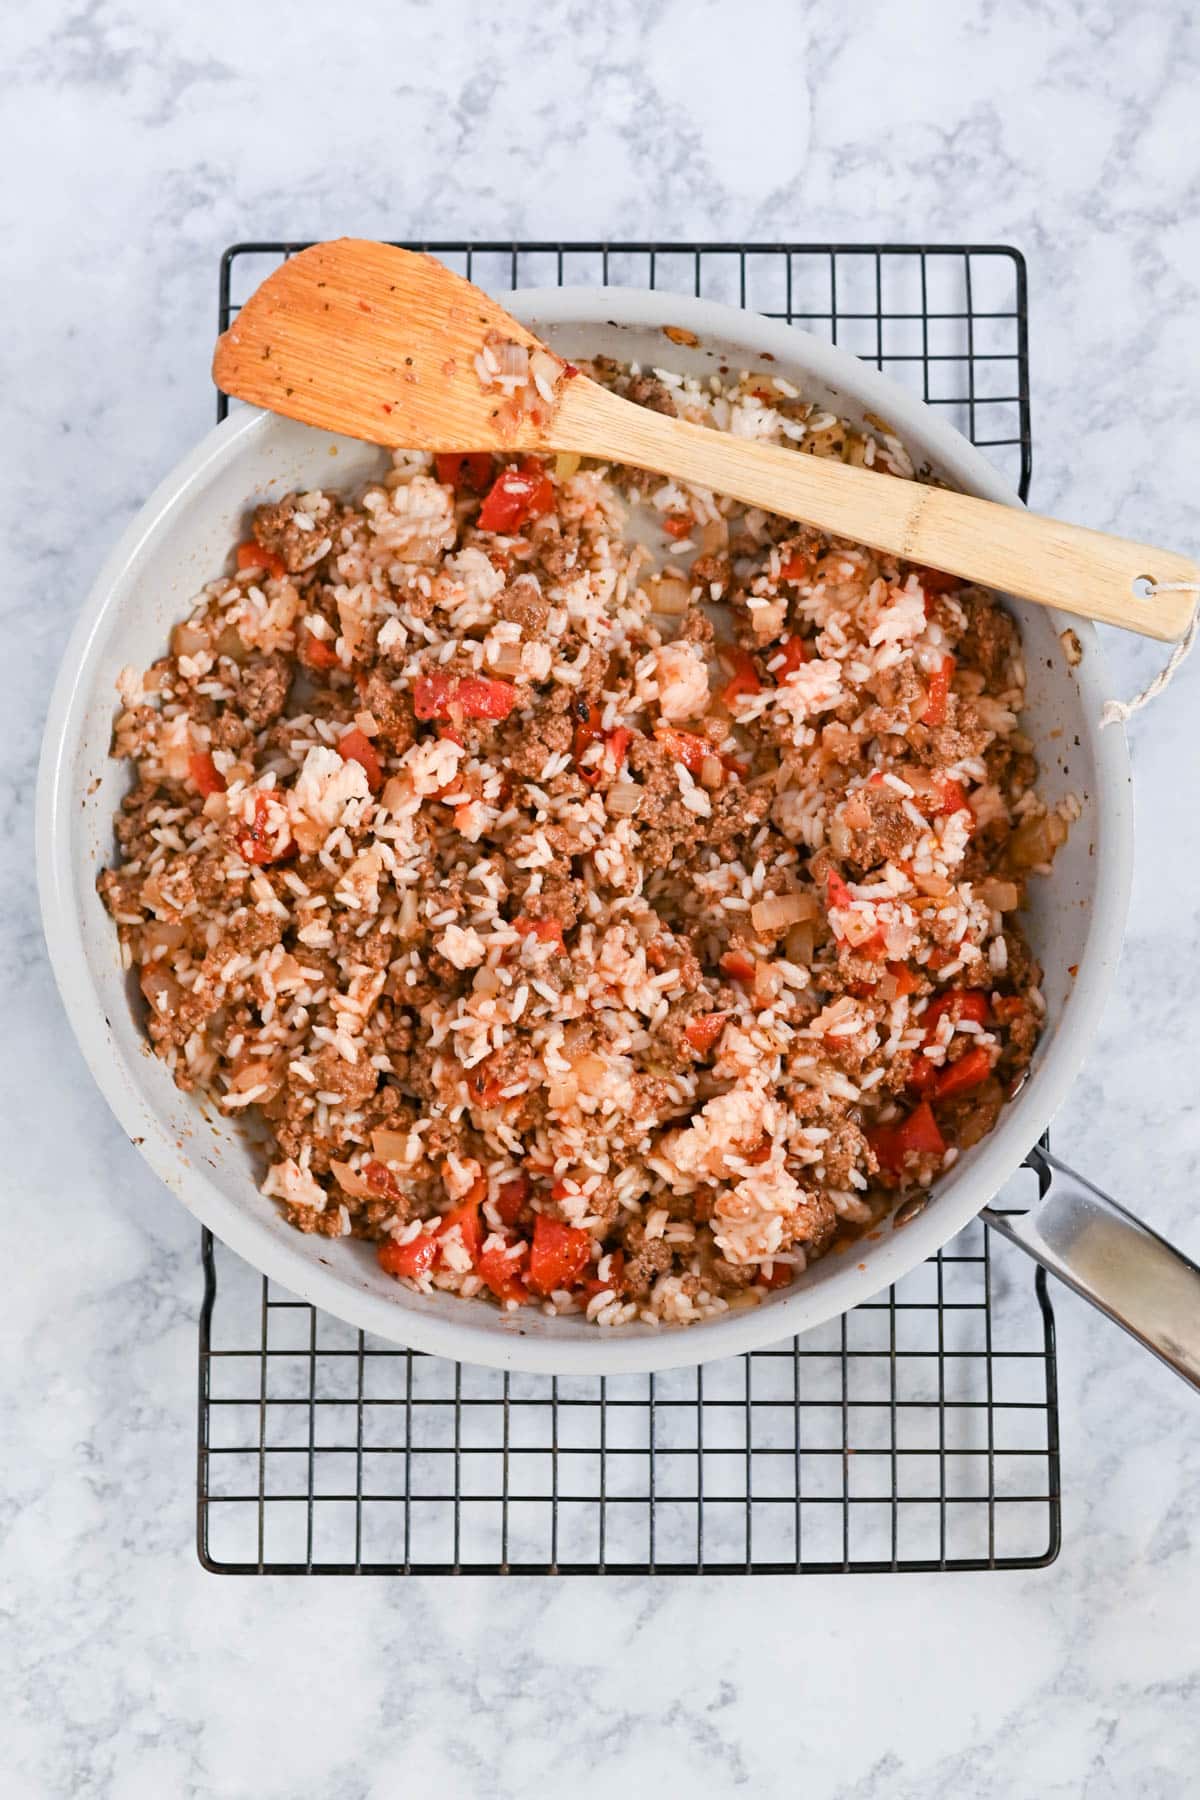 A skillet filled with rice, ground meat, tomatoes, and spices, placed on a cooling rack with a wooden spatula.